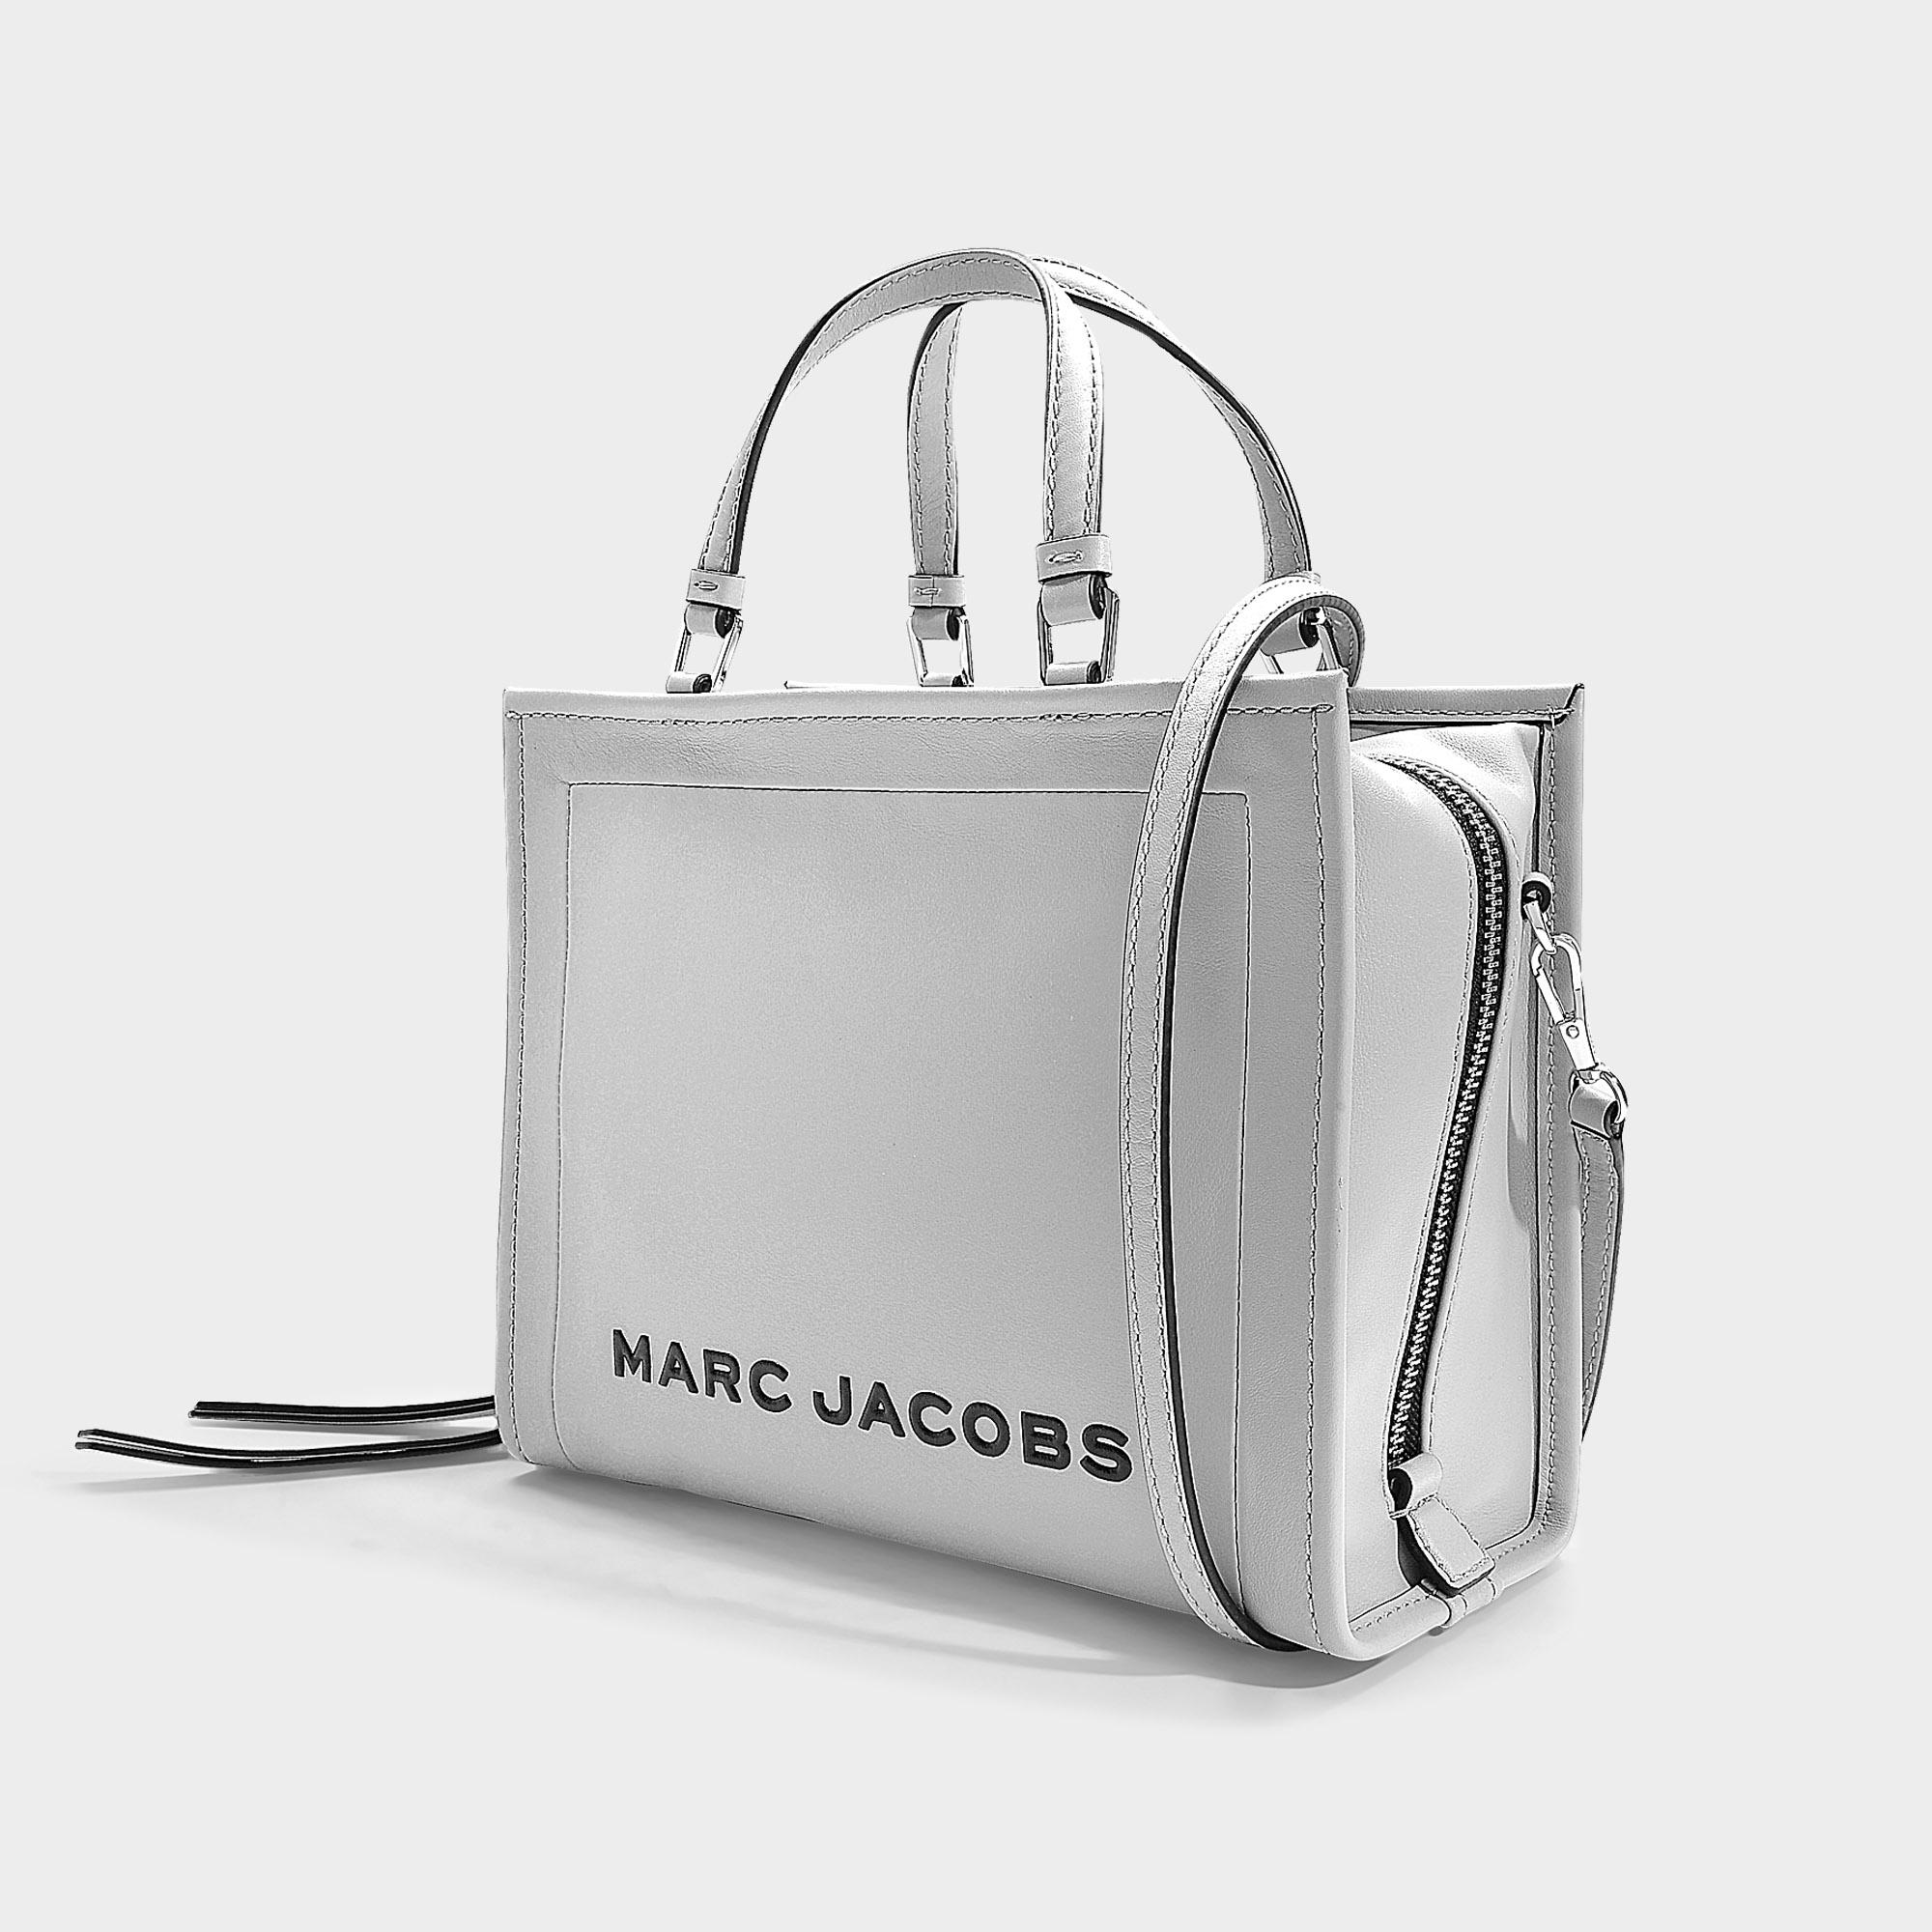 Marc Jacobs The Box Leather Shopper in Grey (Gray) - Lyst